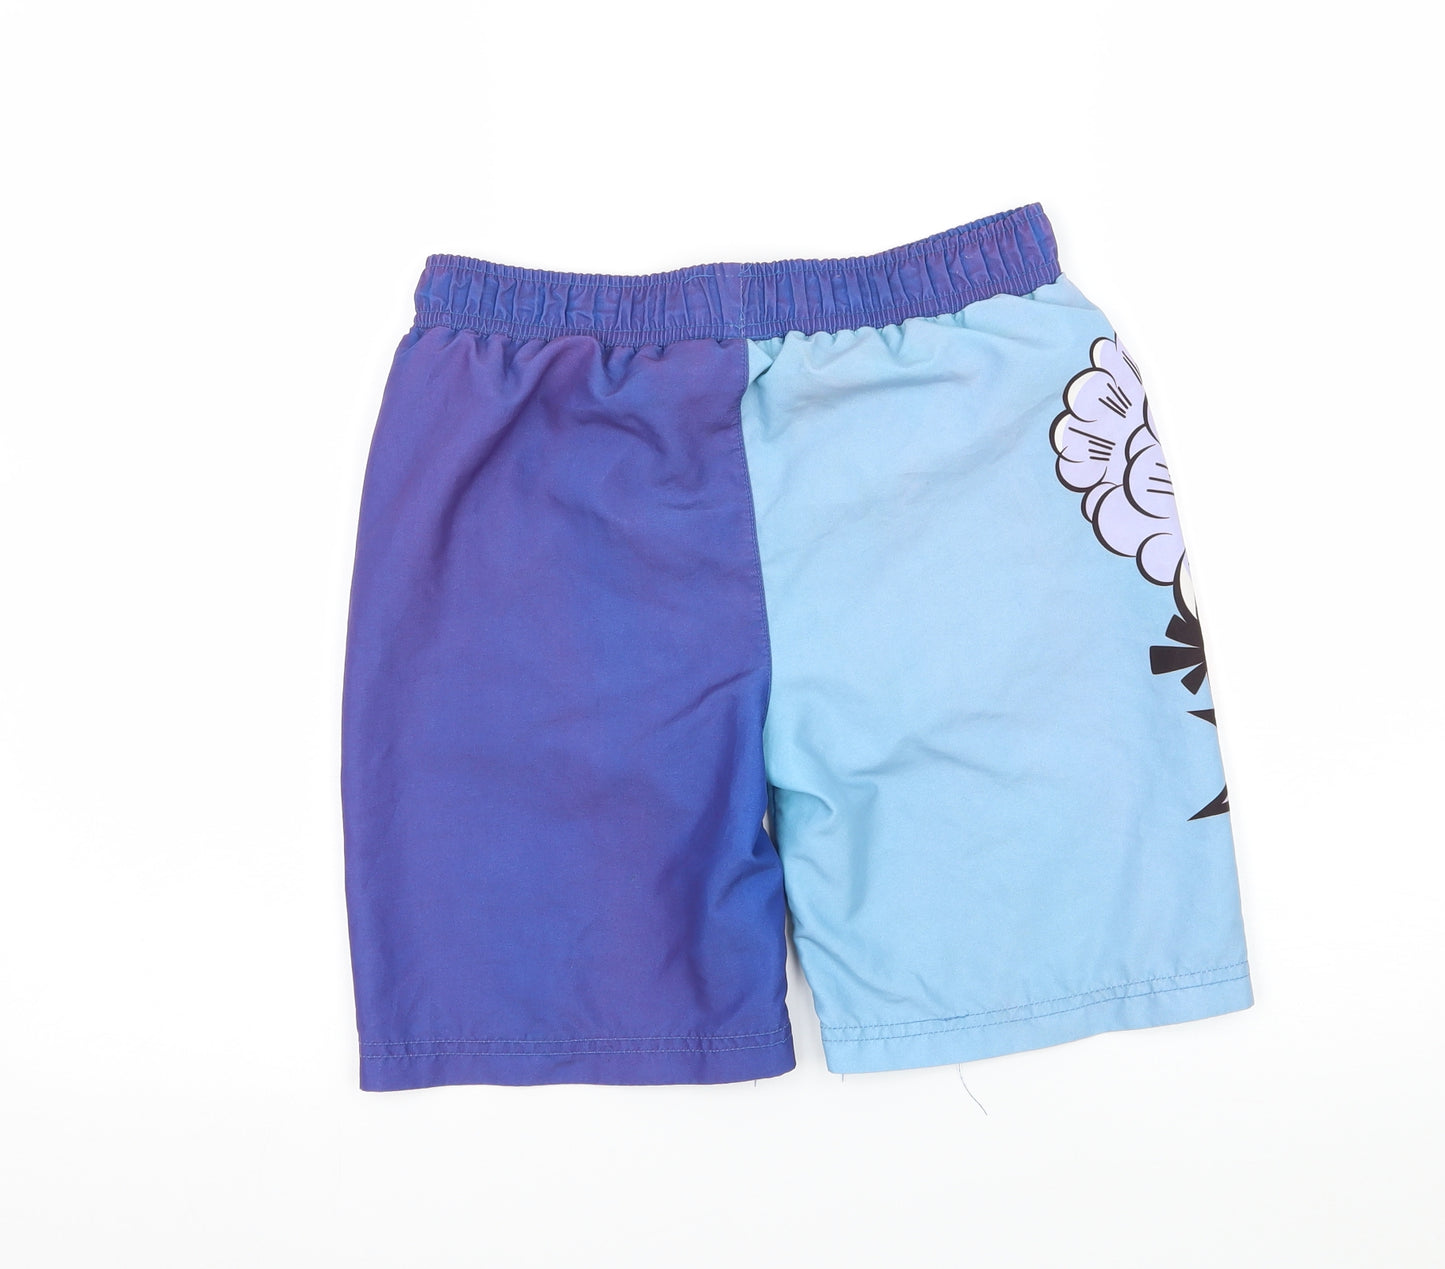 Angry Birds Boys Blue Geometric  Sweat Shorts Size 7-8 Years - Angry Birds